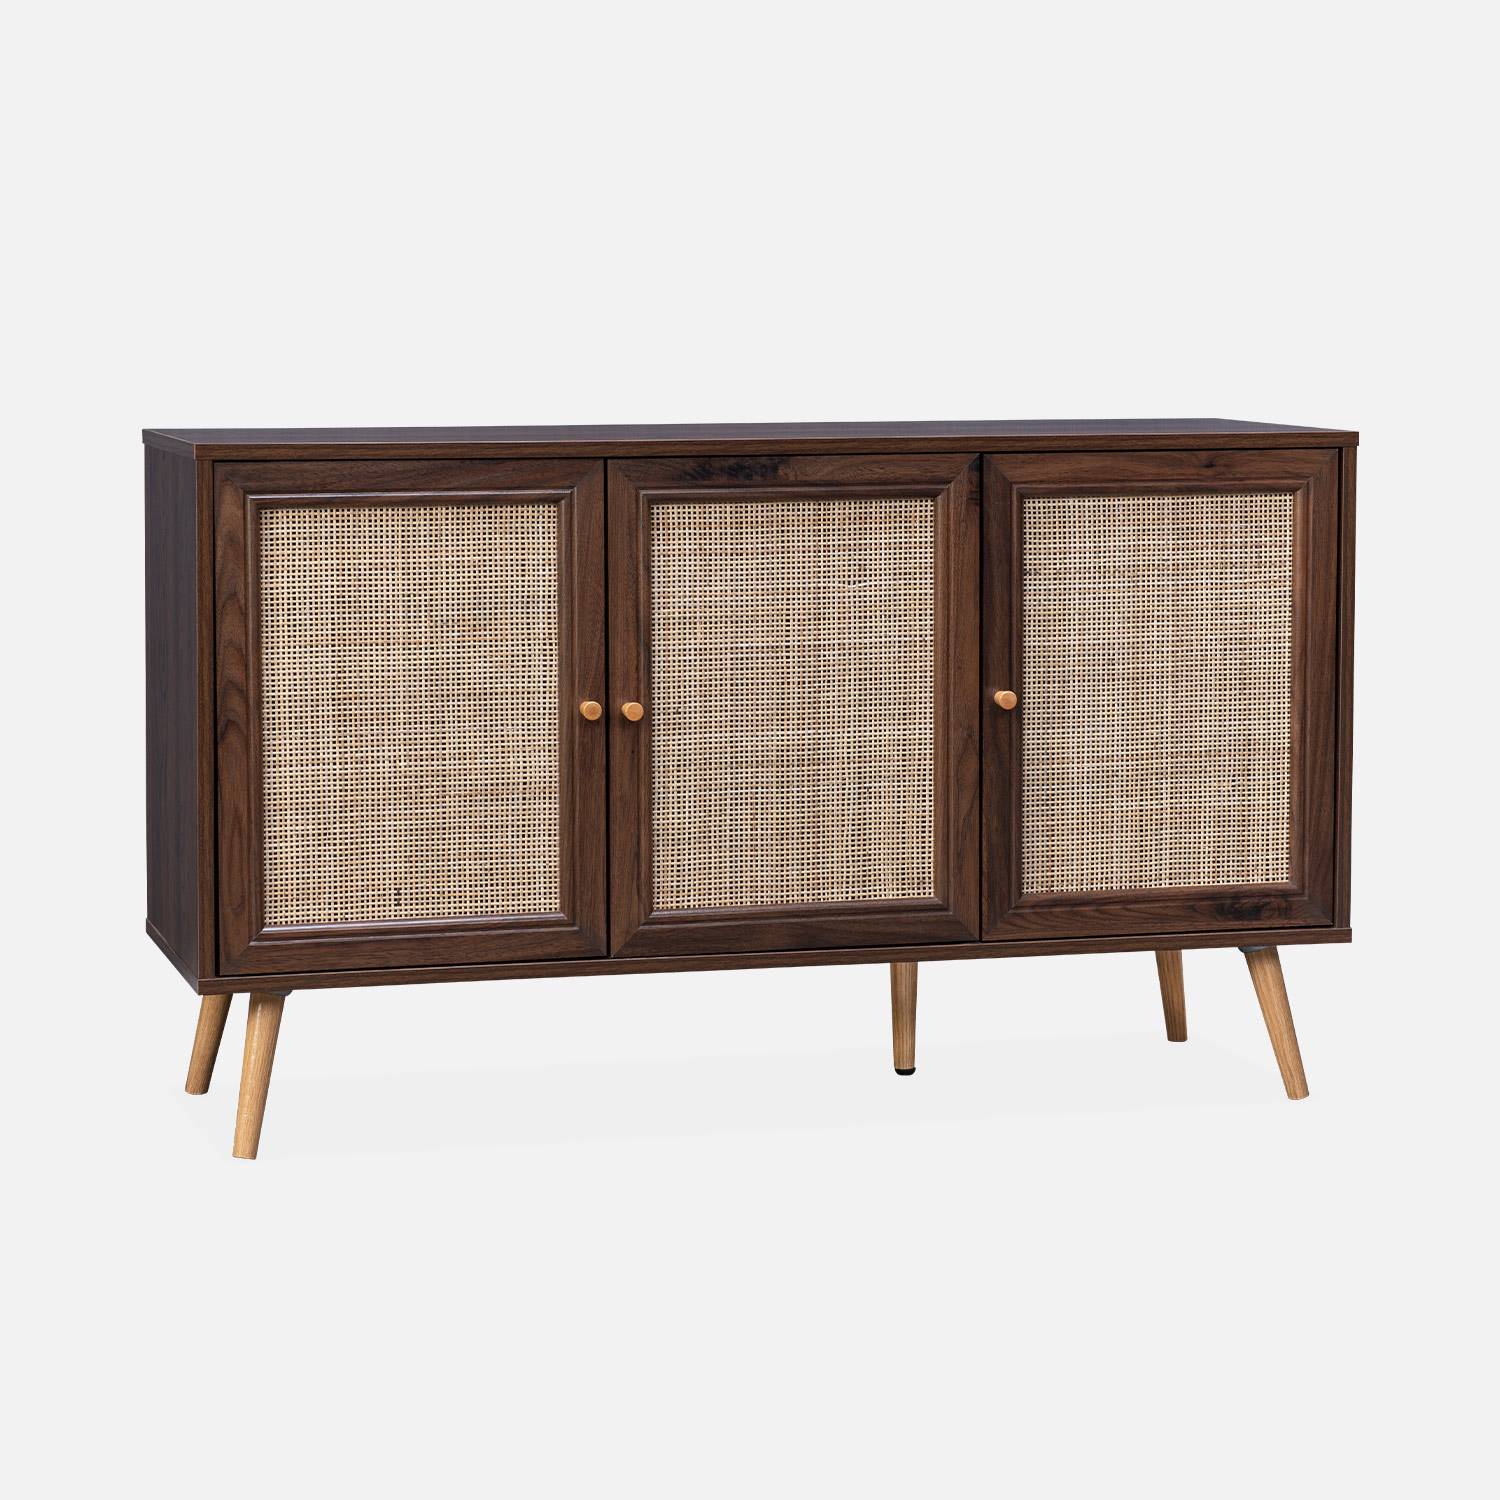 Wooden and cane rattan detail sideboard with Scandi-style legs, Dark wood colour | sweeek